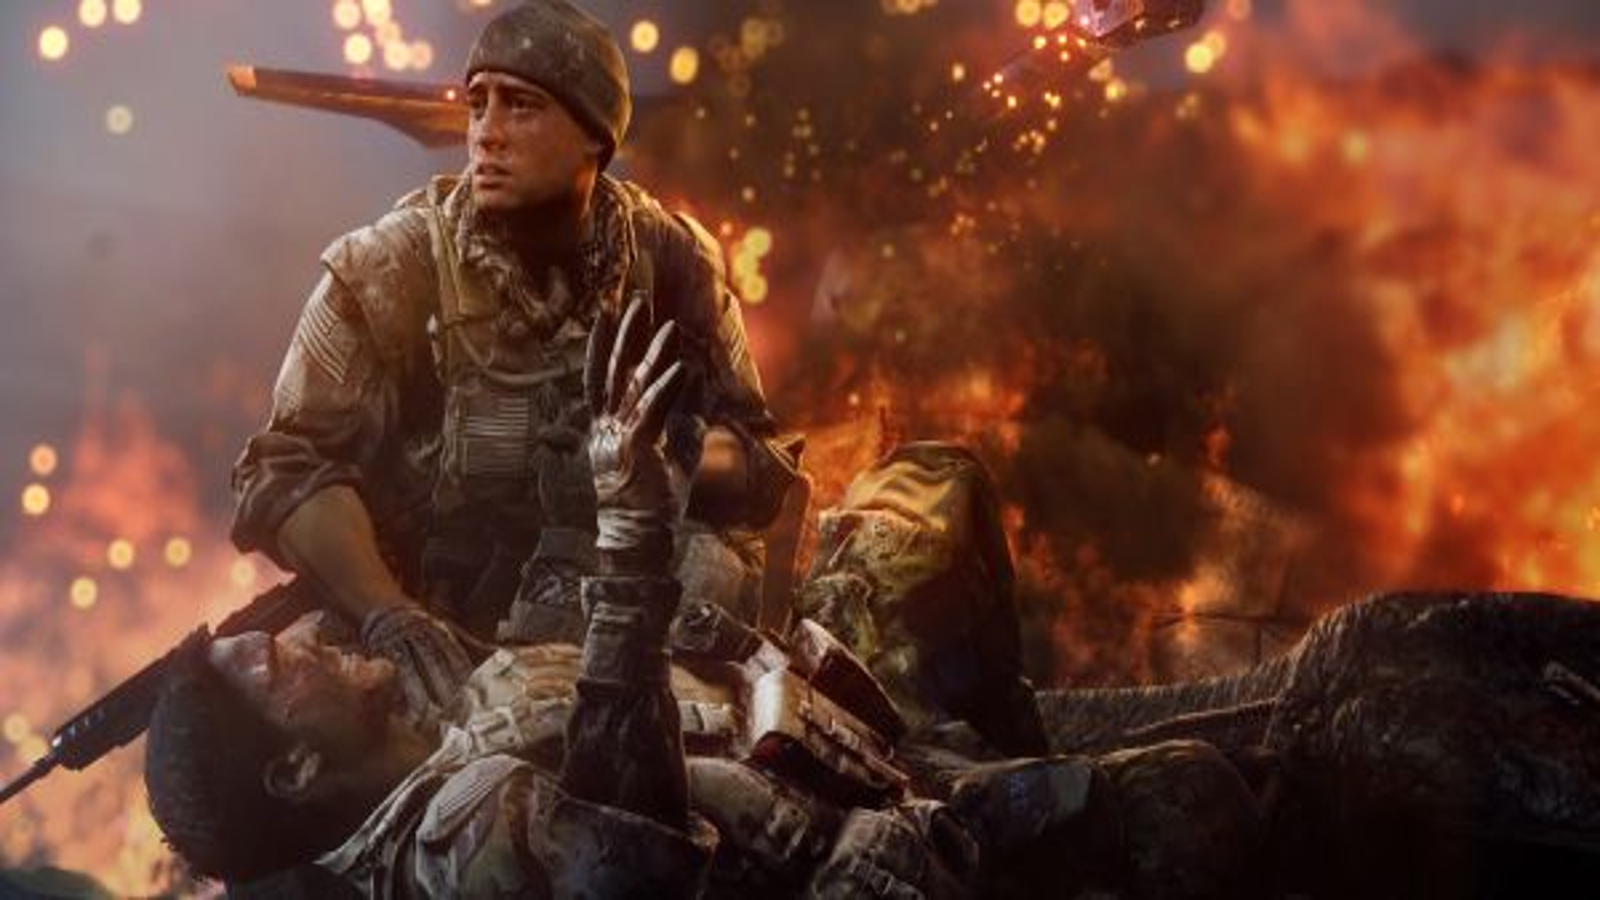 Some Xbox owners struggling to download Battlefield 4 DLC - GameSpot